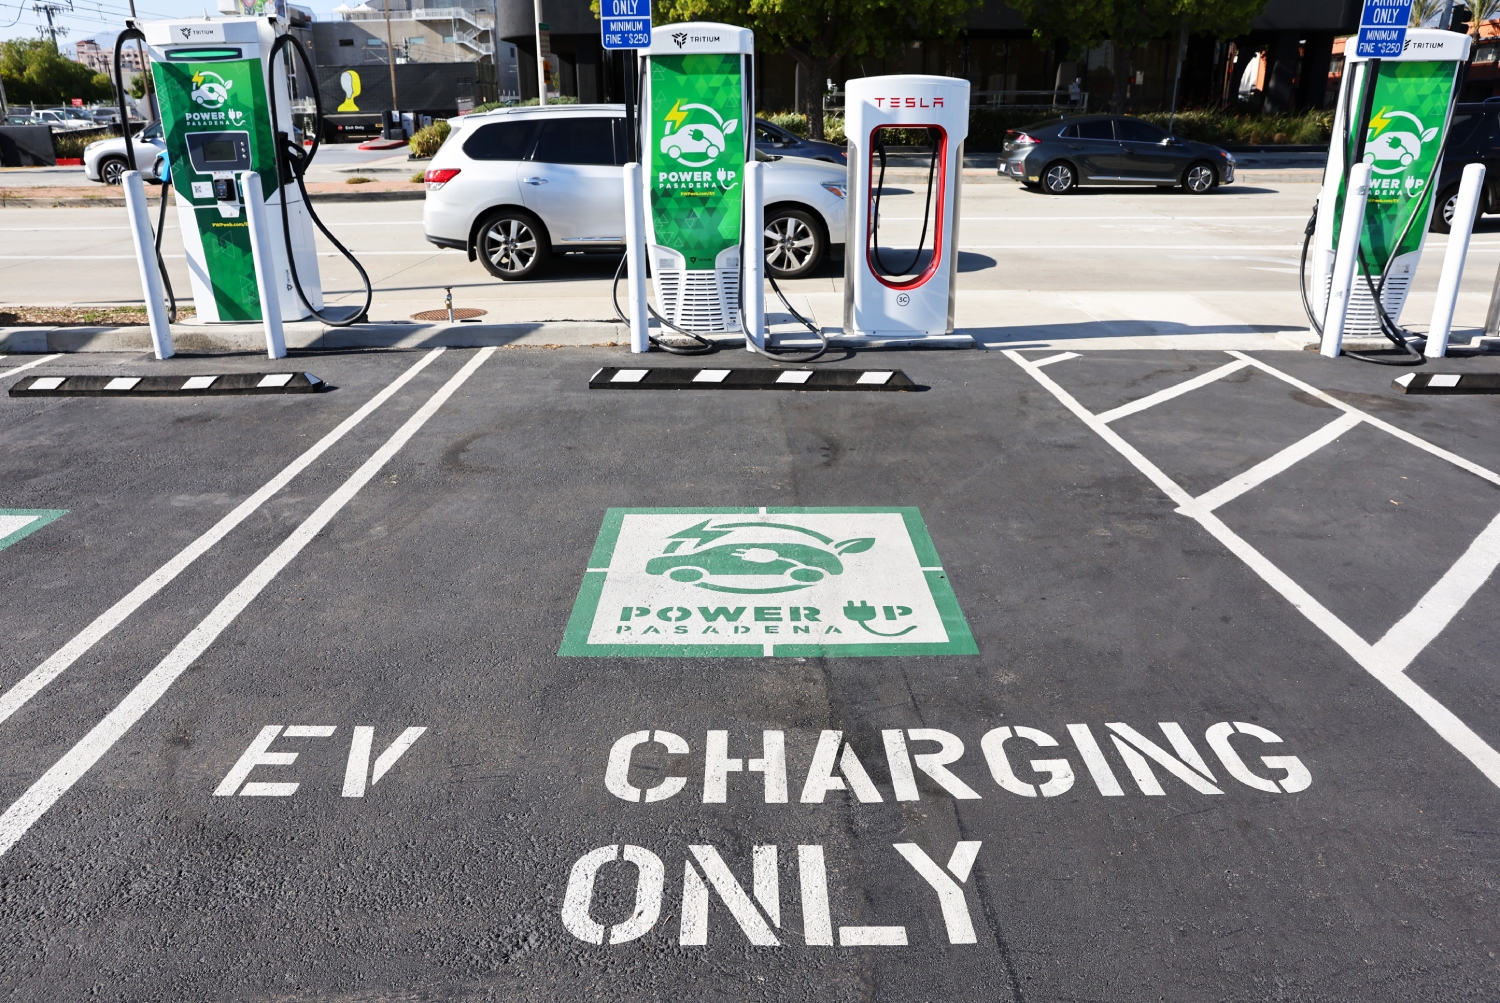 The national electric vehicle charging challenge as seen by GM, Ford and Tesla